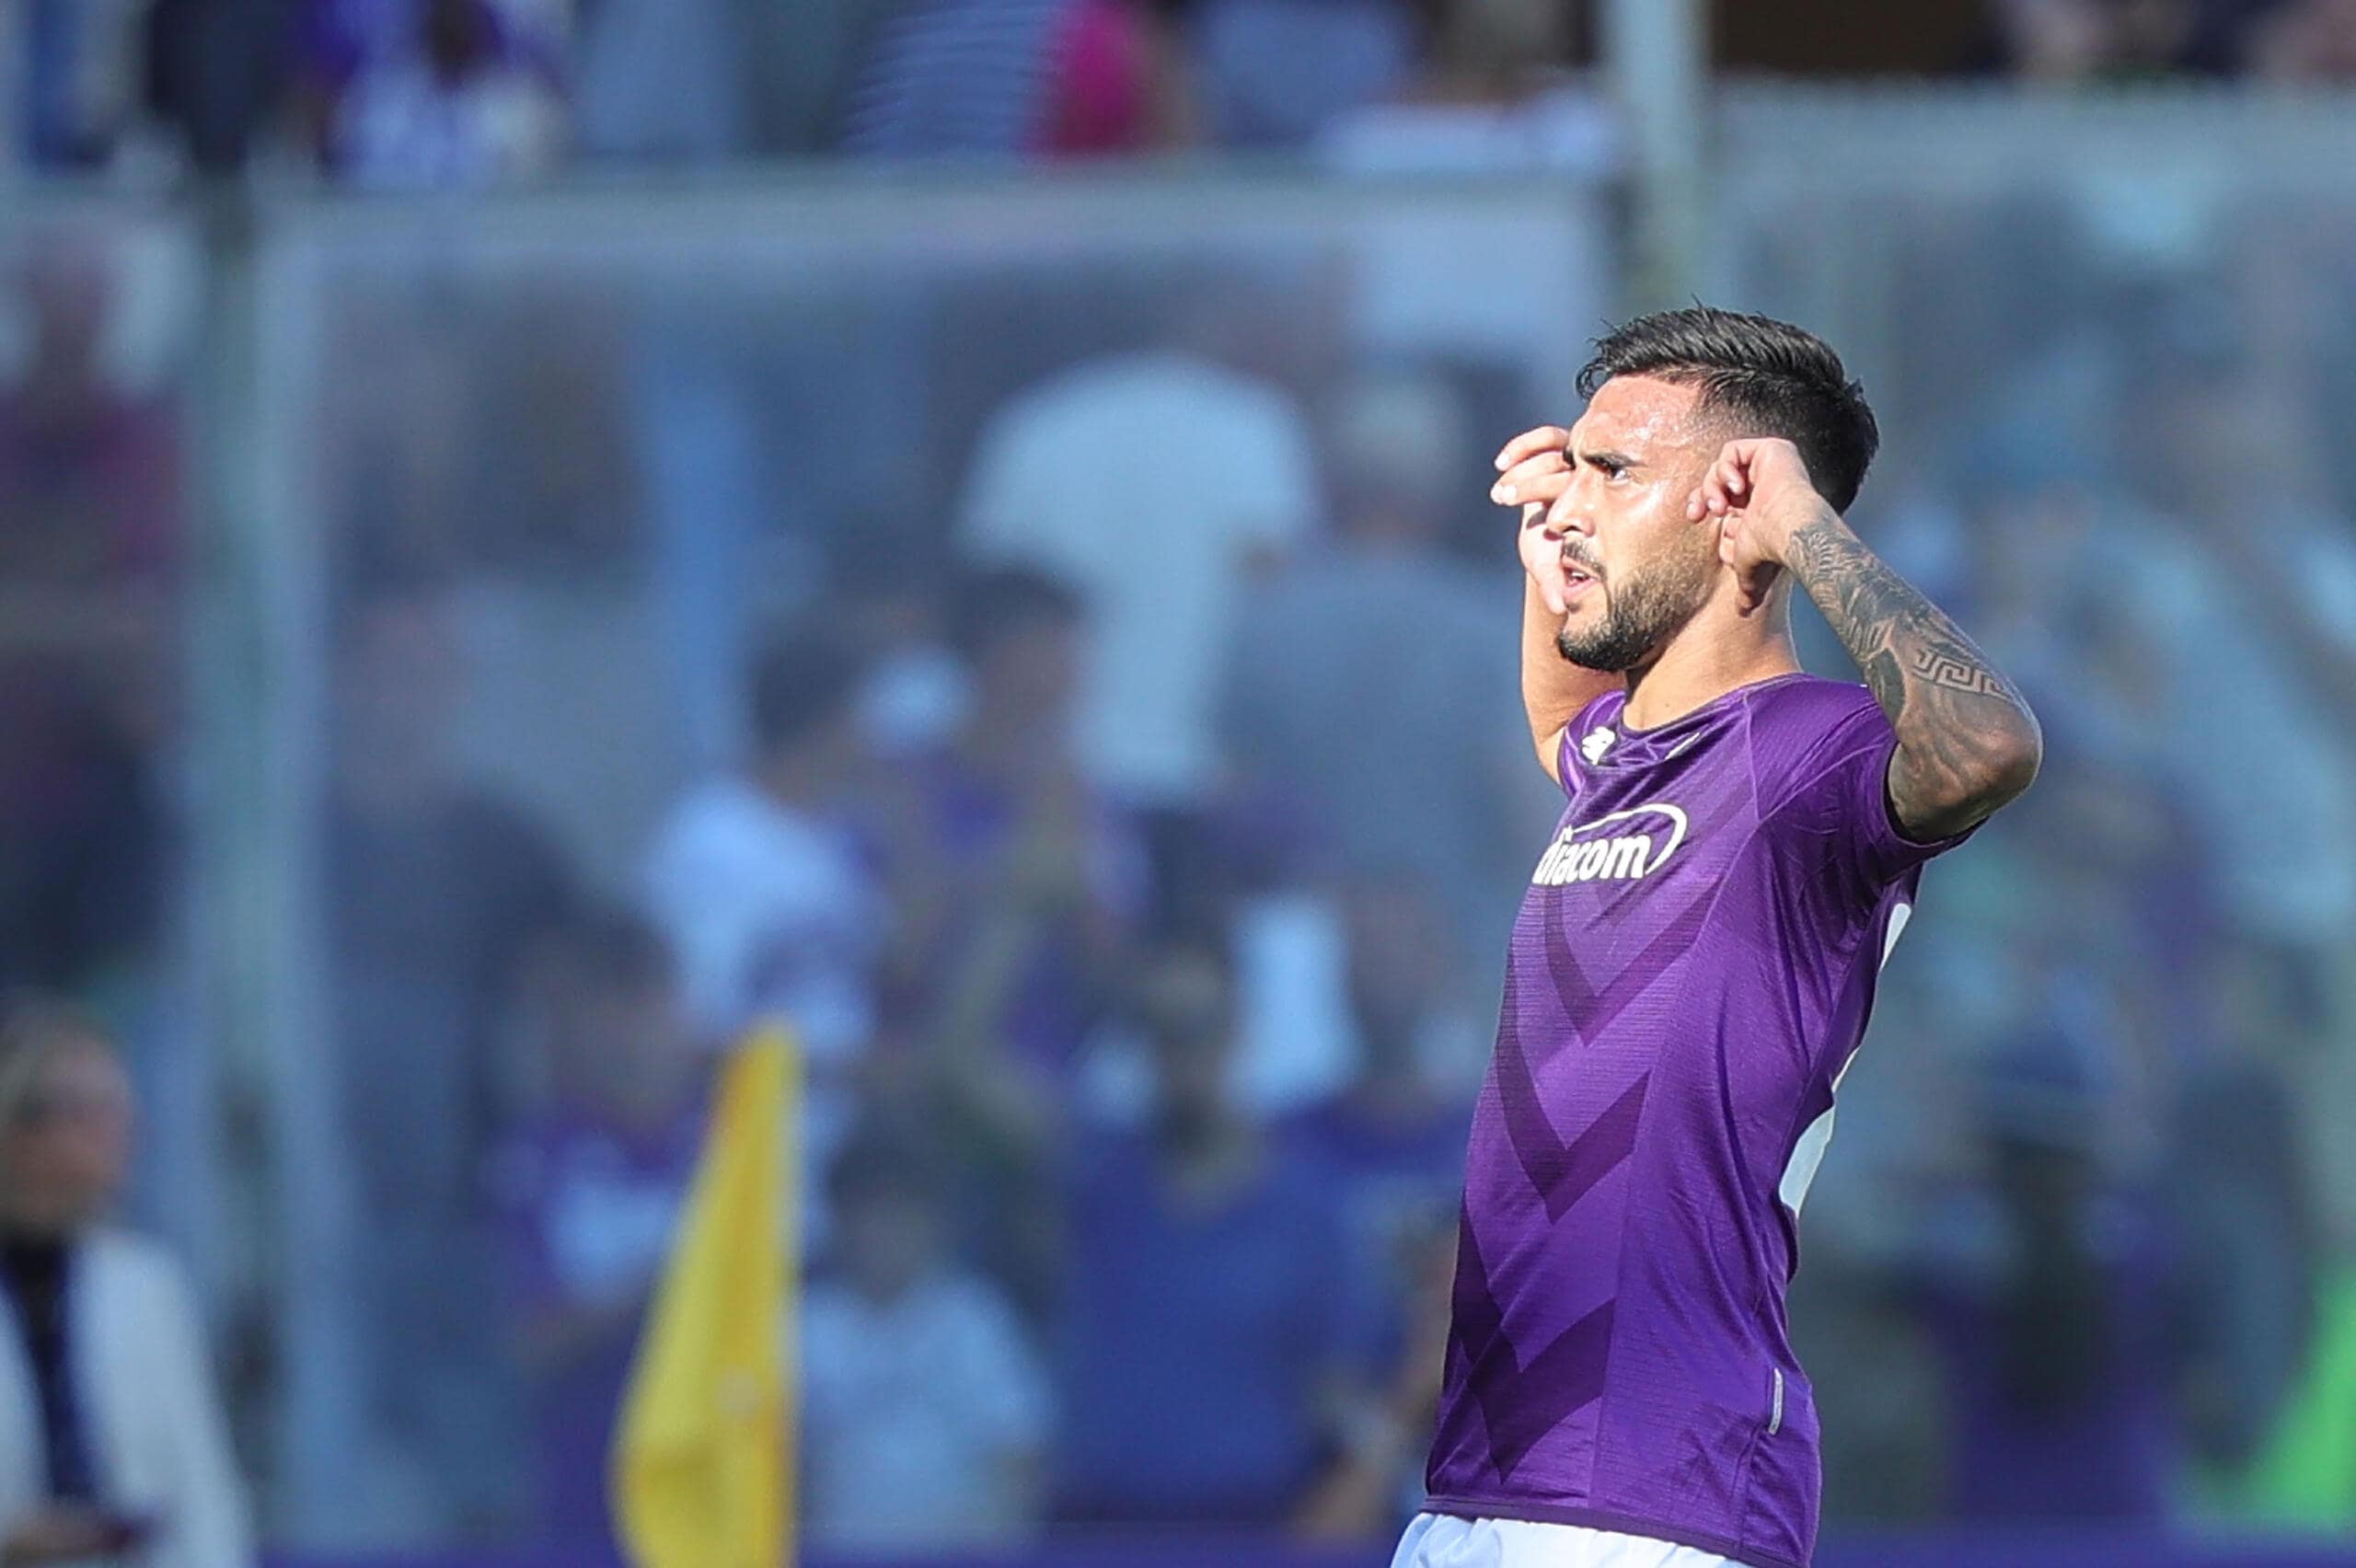 Nicolas Gonzalez reflected on the disappointment of missing the World Cup due to injury, his Fiorentina spell, and more in an interview.